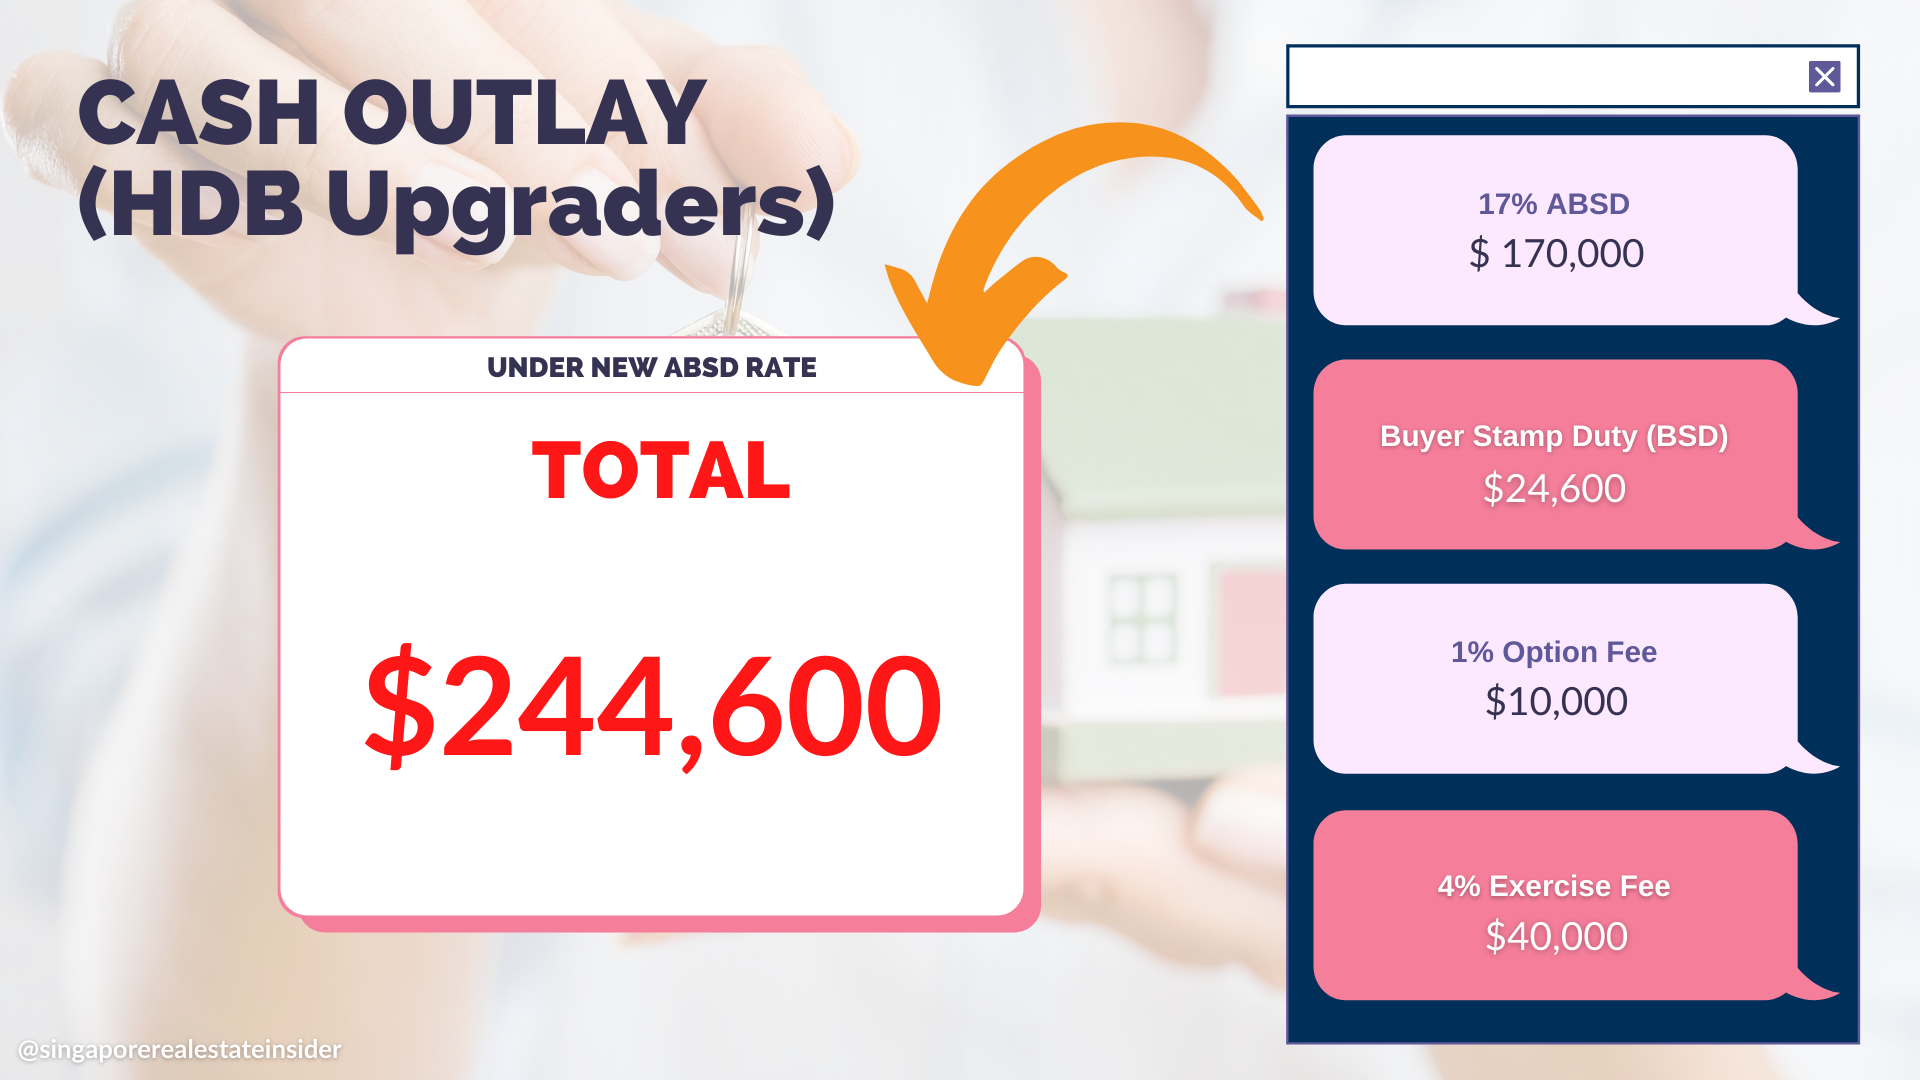 HDB Upgraders cash Outlay winners and losers